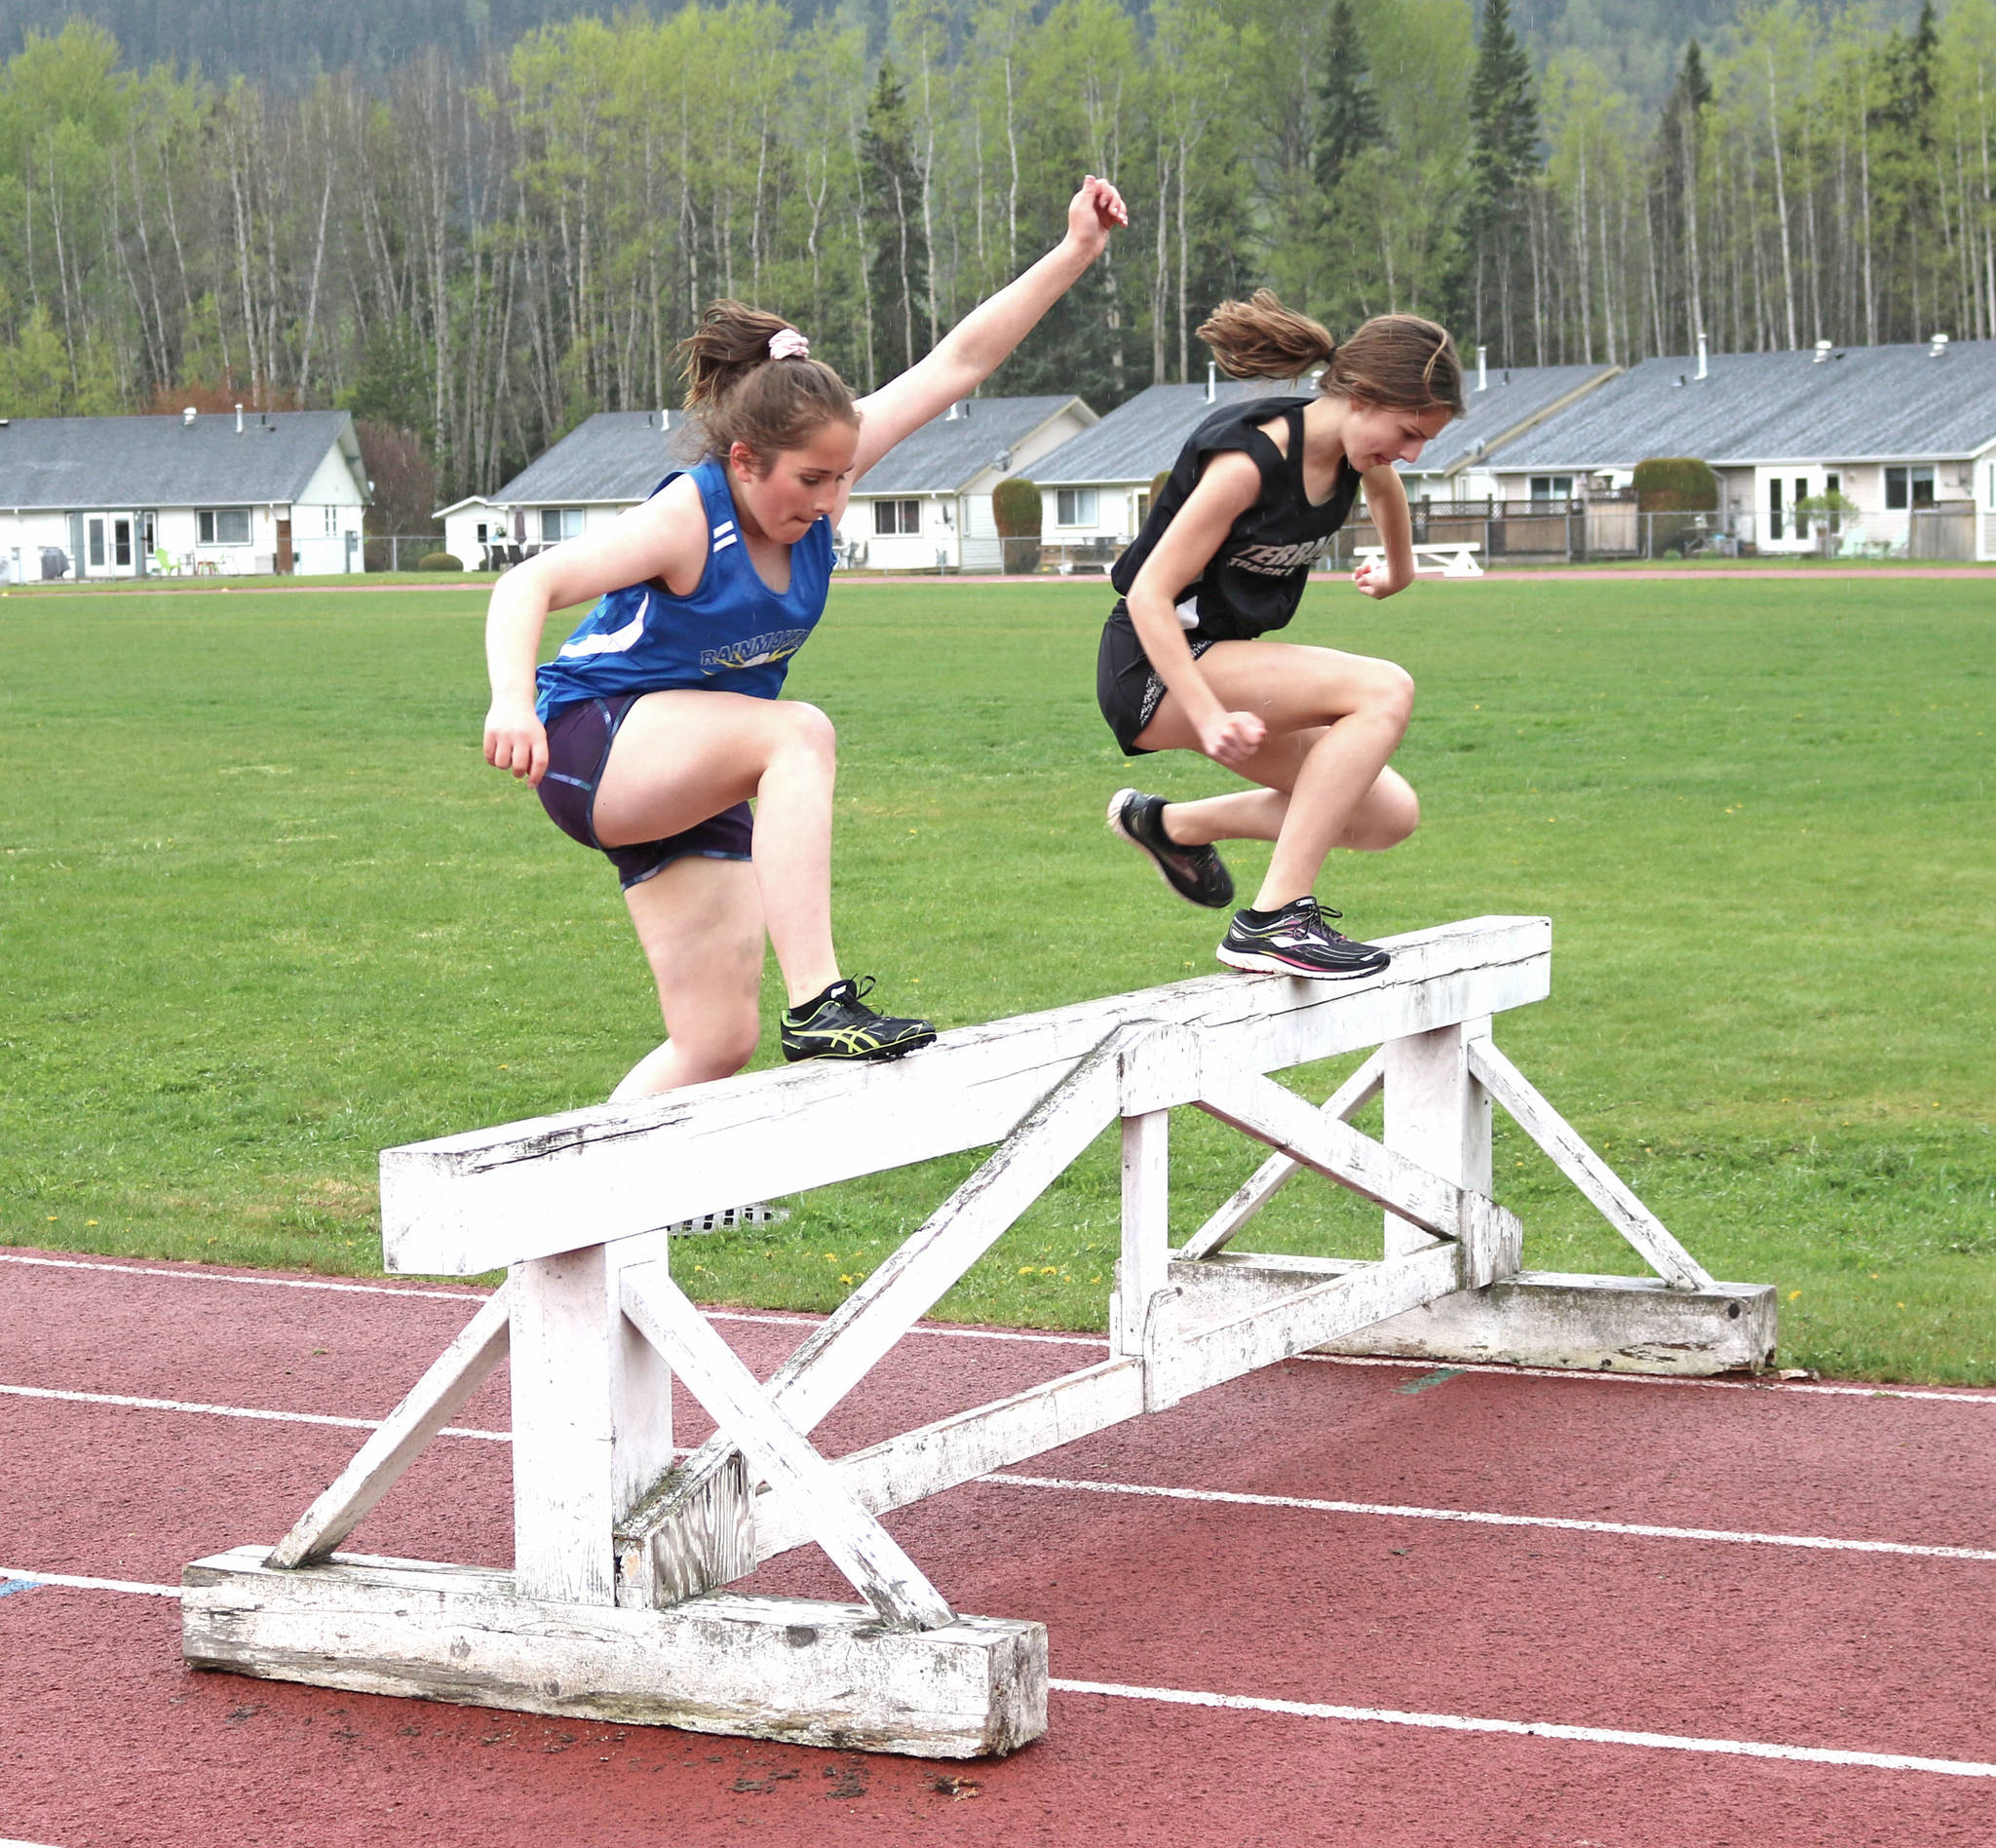 16915554_web1_A-HS-track-May-2019--92-